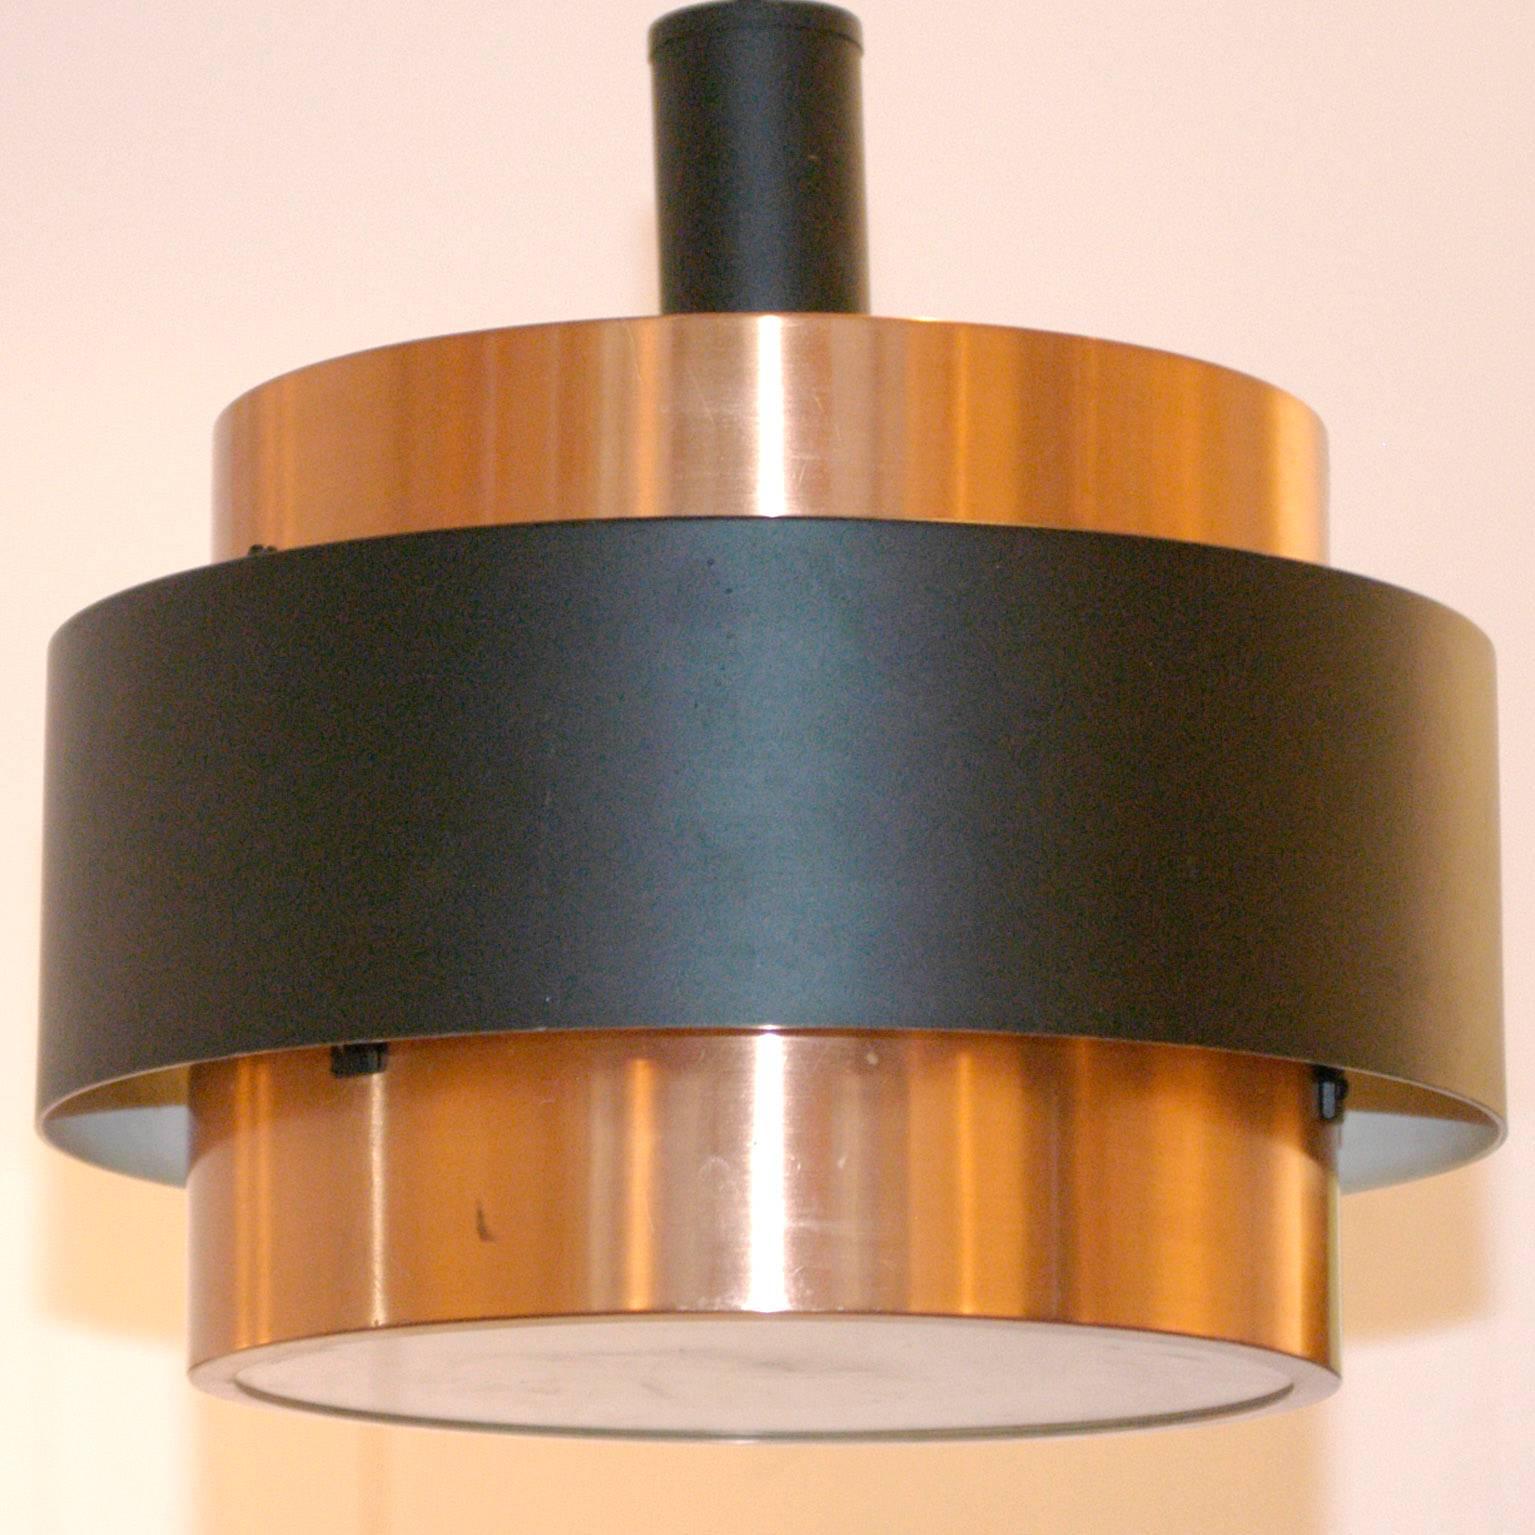 Lacquered Danish Modern Copper and Metal Pendant Lamp in the Style of Jo Hammerborg